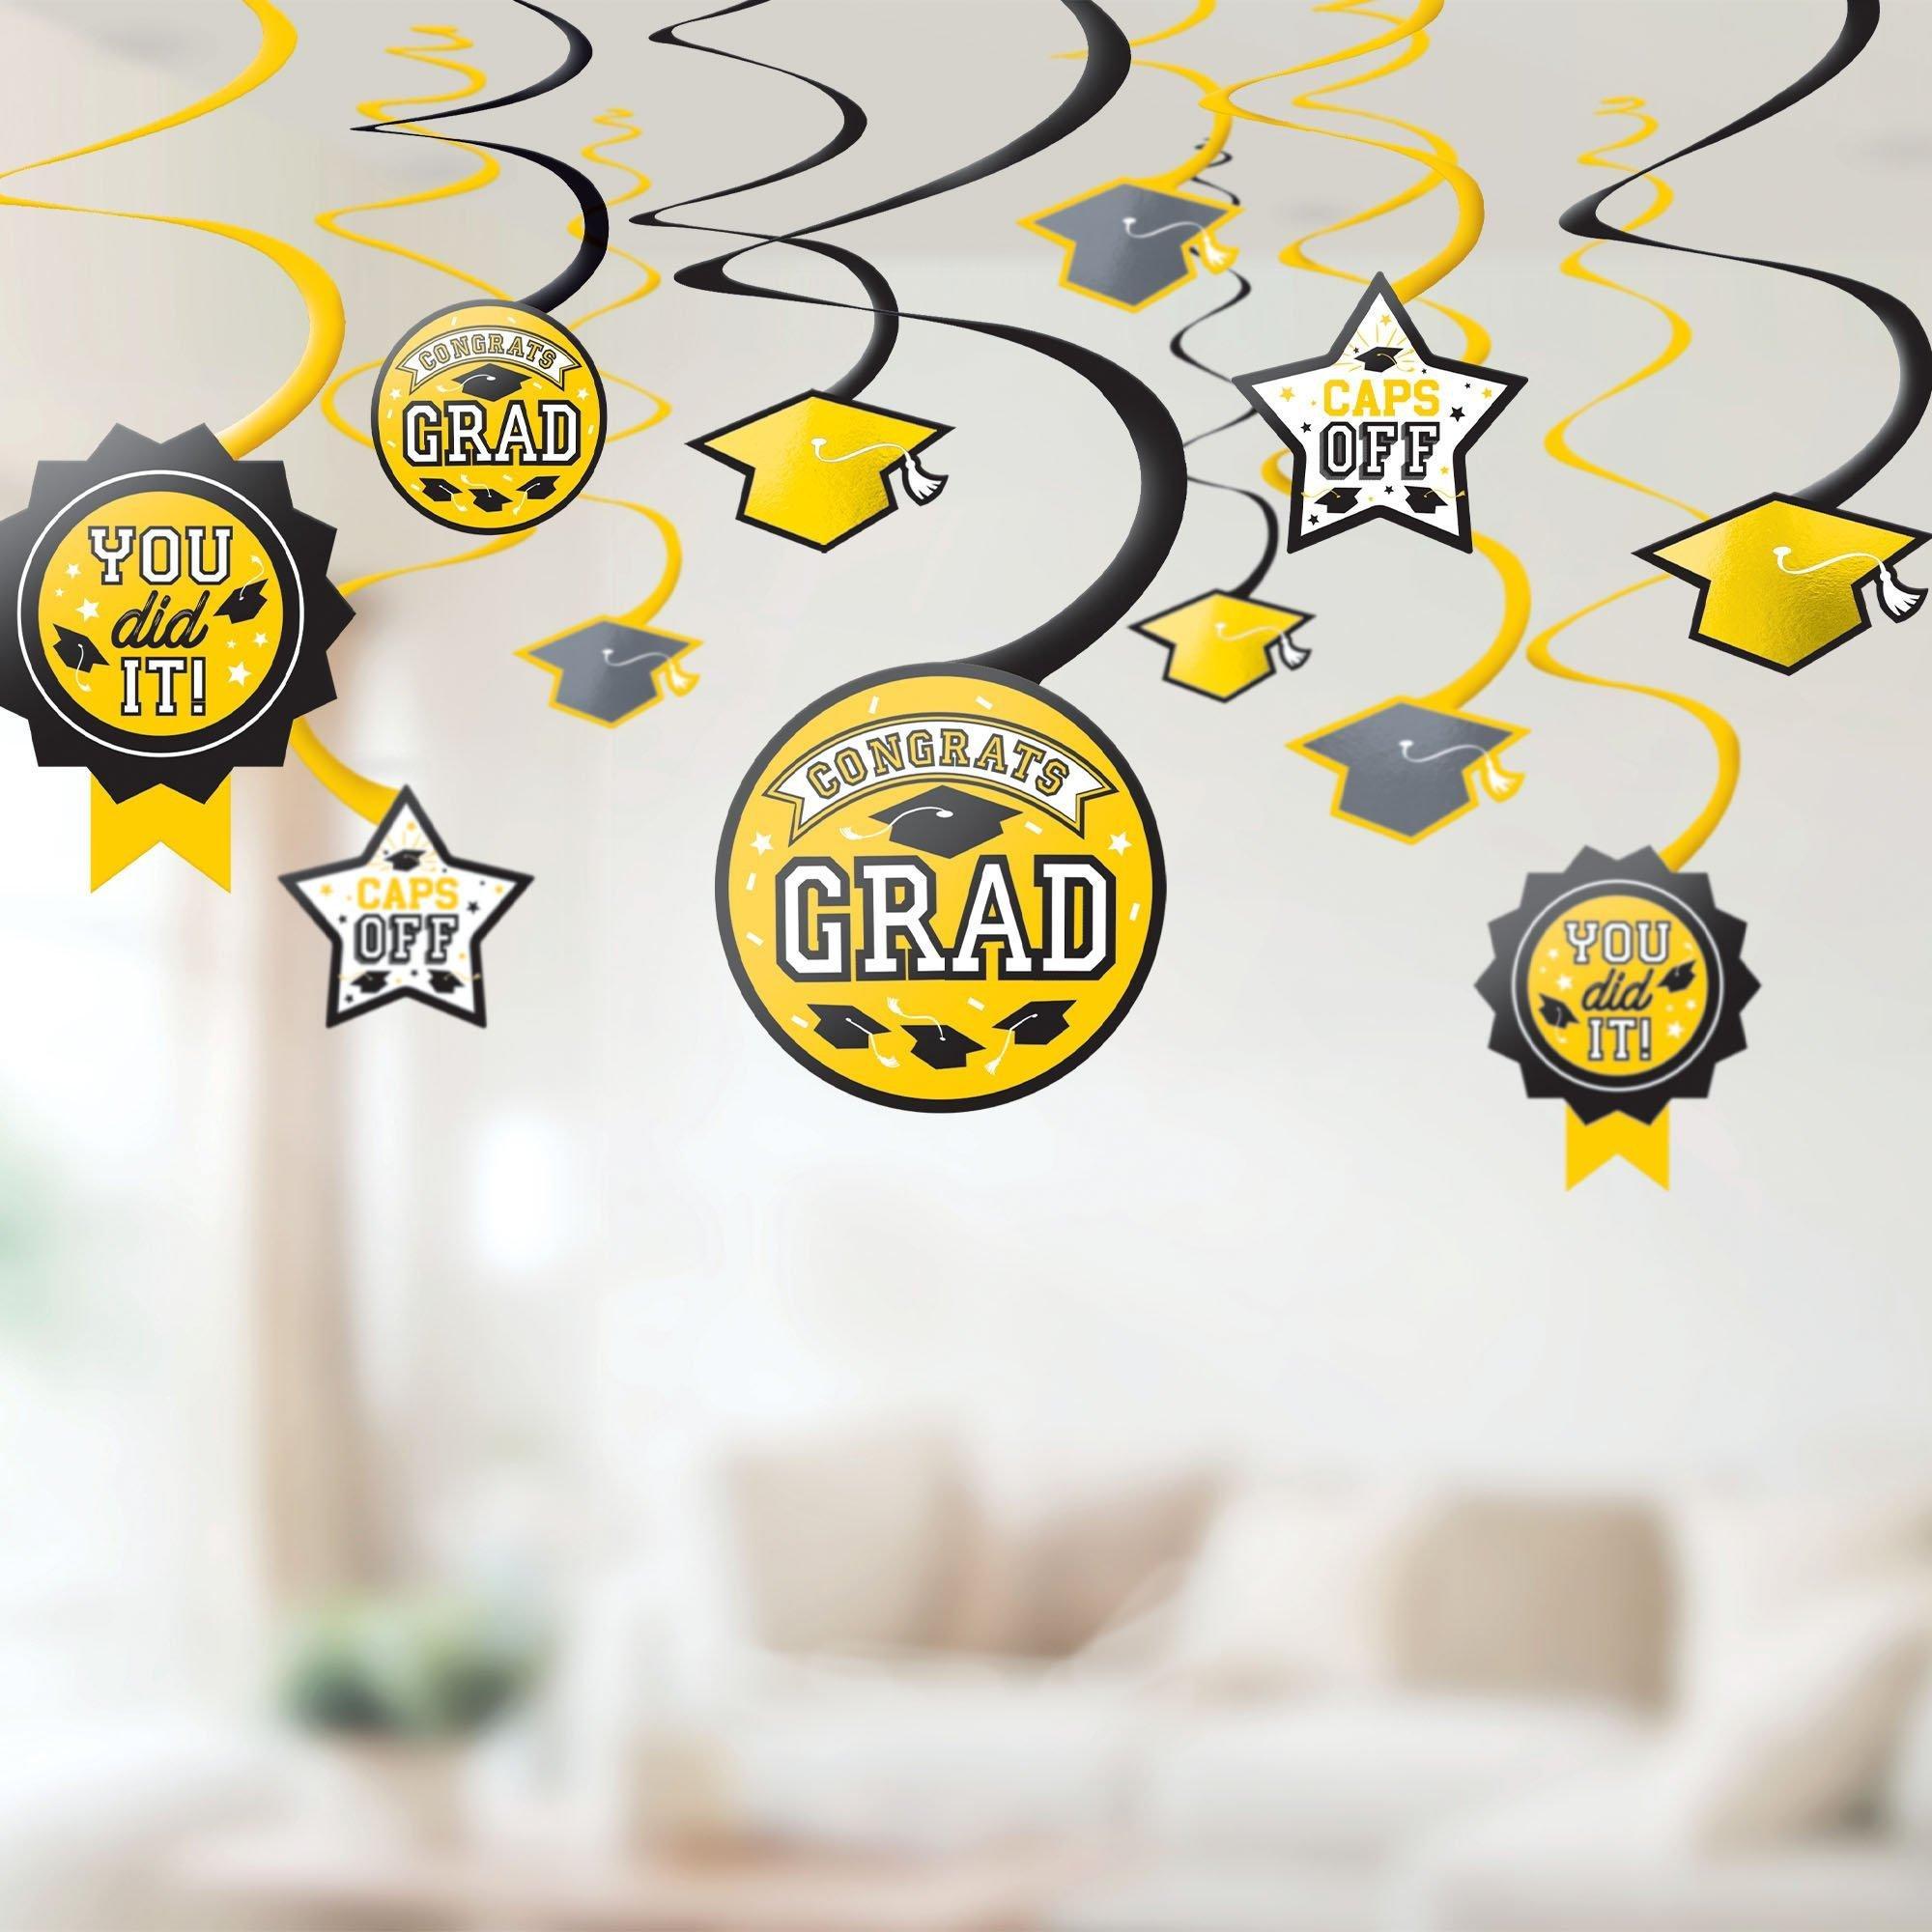 Graduation Party Supplies Kit for 80 with Decorations, Banners, Balloons, Plates, Napkins - Yellow Congrats Grad